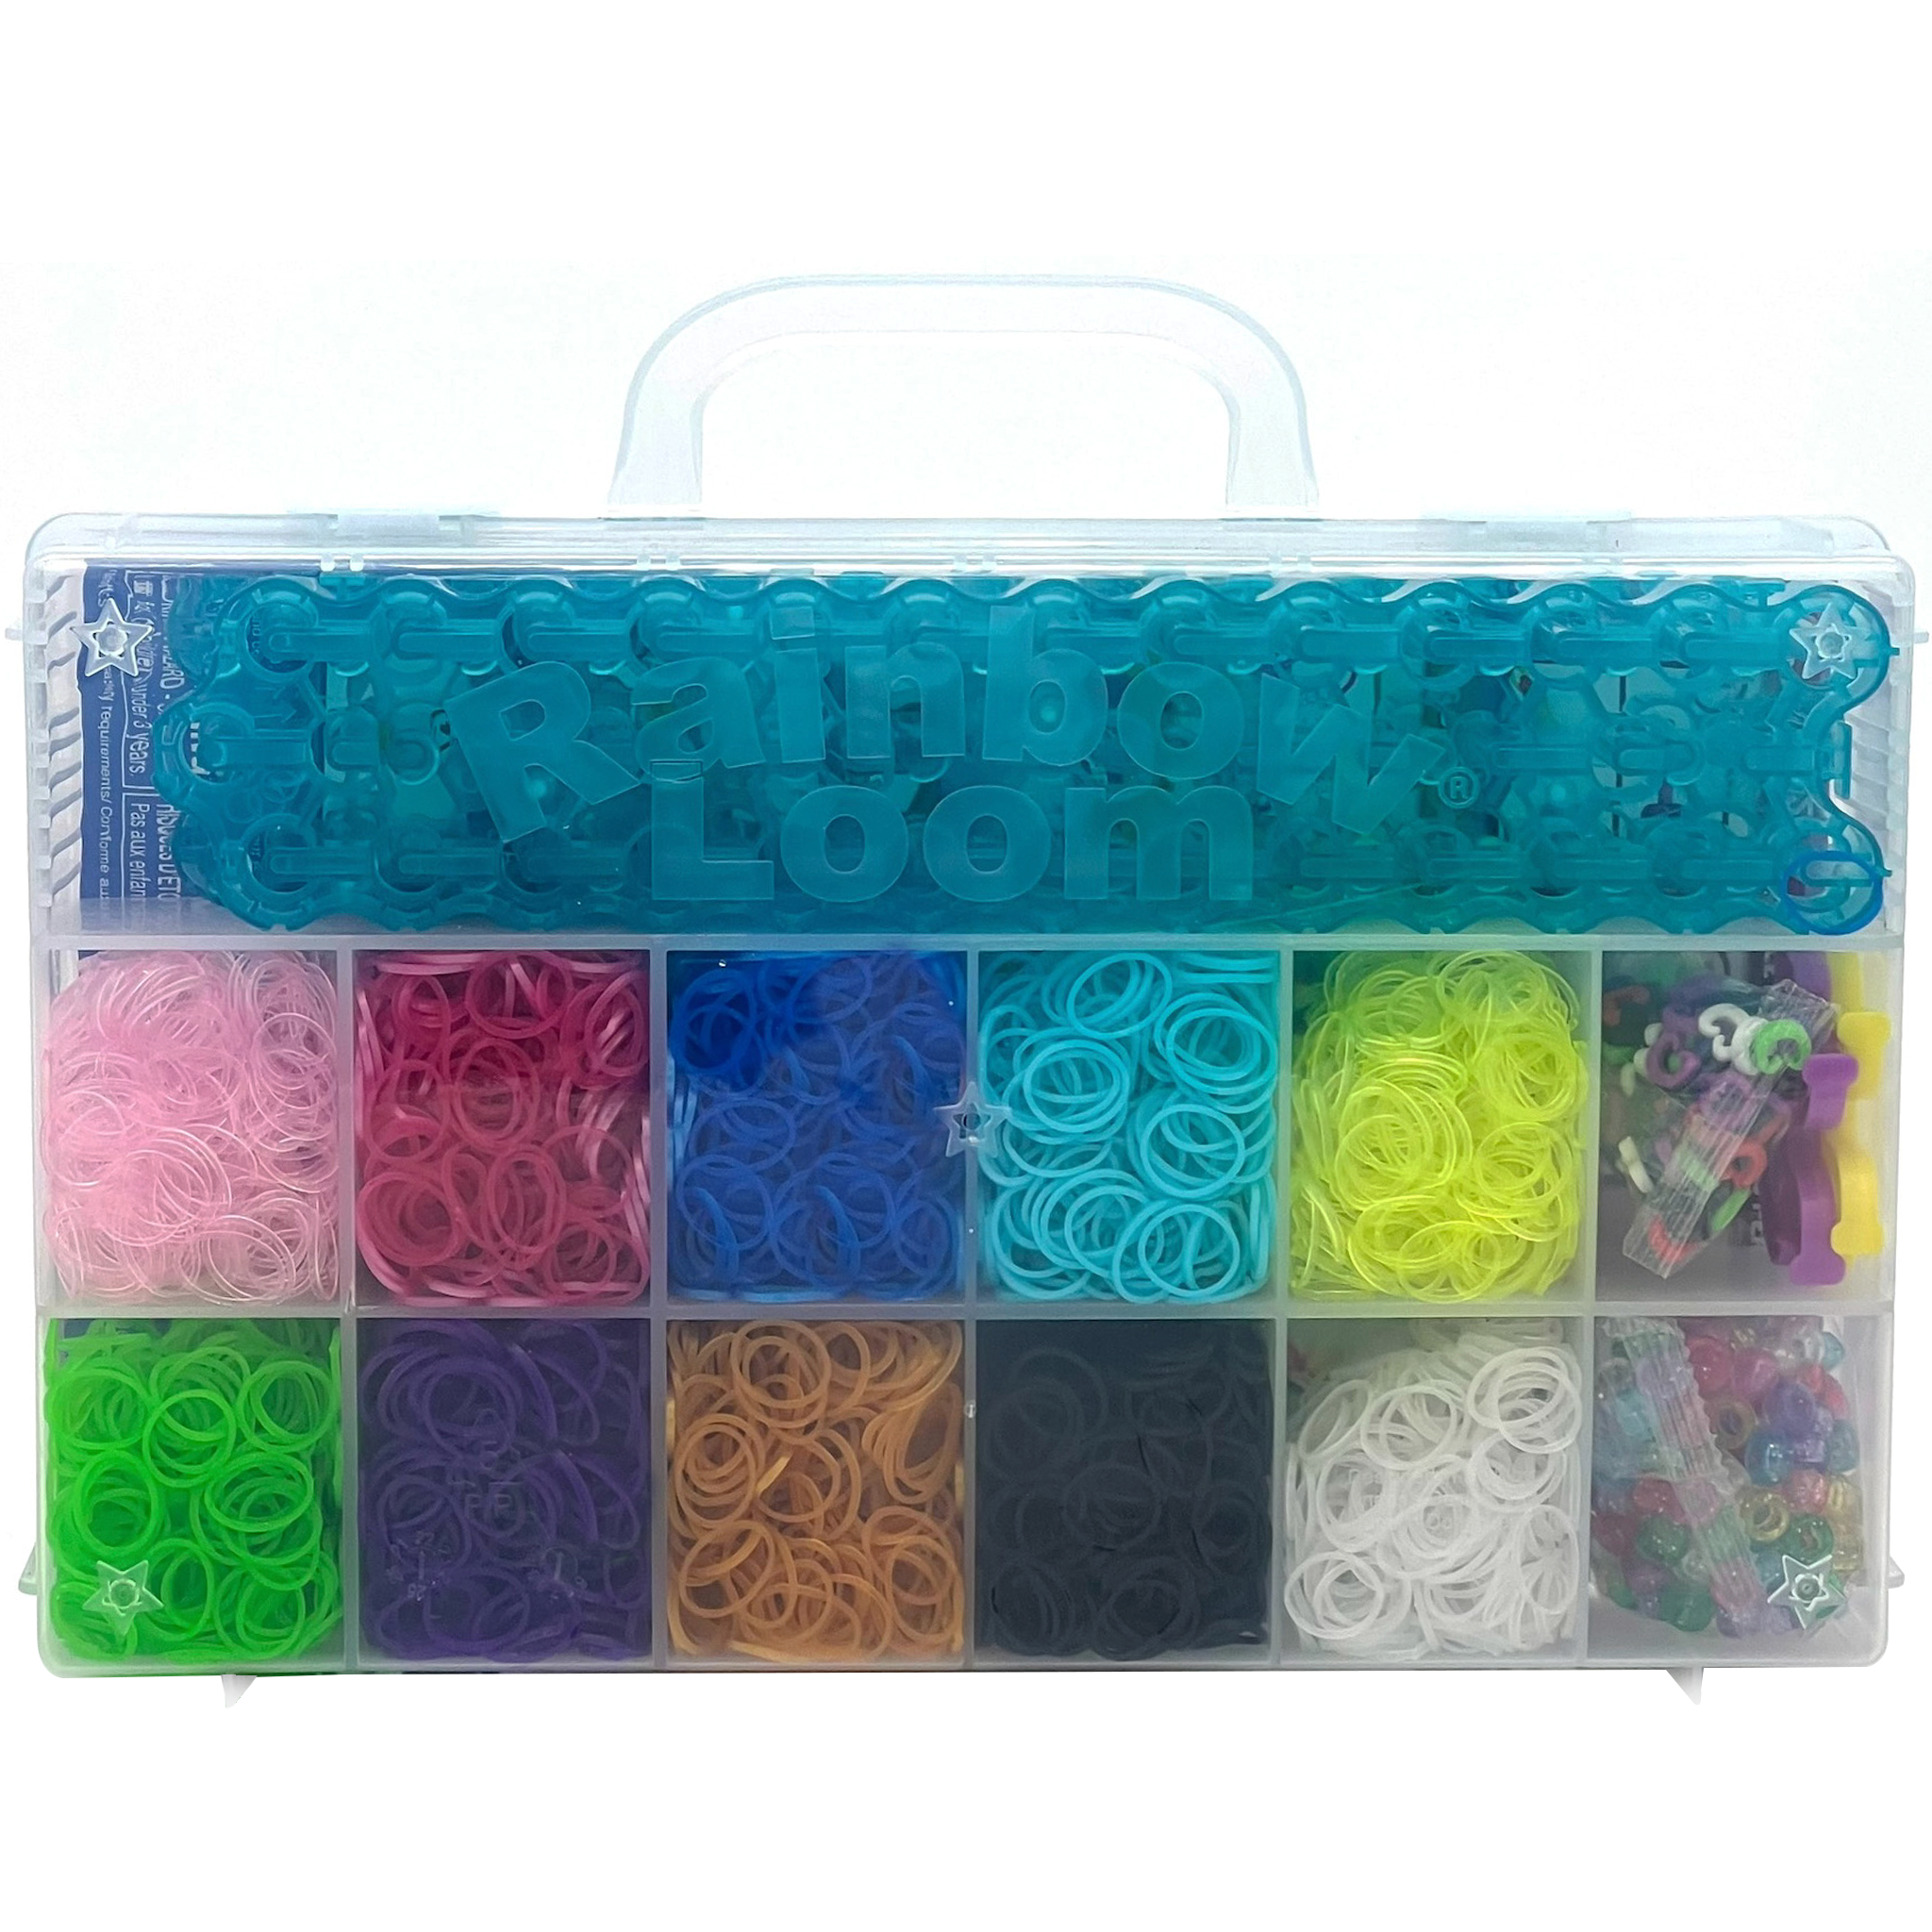 Rainbow Loom® Duo Combo with Jewel Rubber Bands Collection, Features 2  connectable to Make Longer and Wider Creations, an Organizer Case, Great